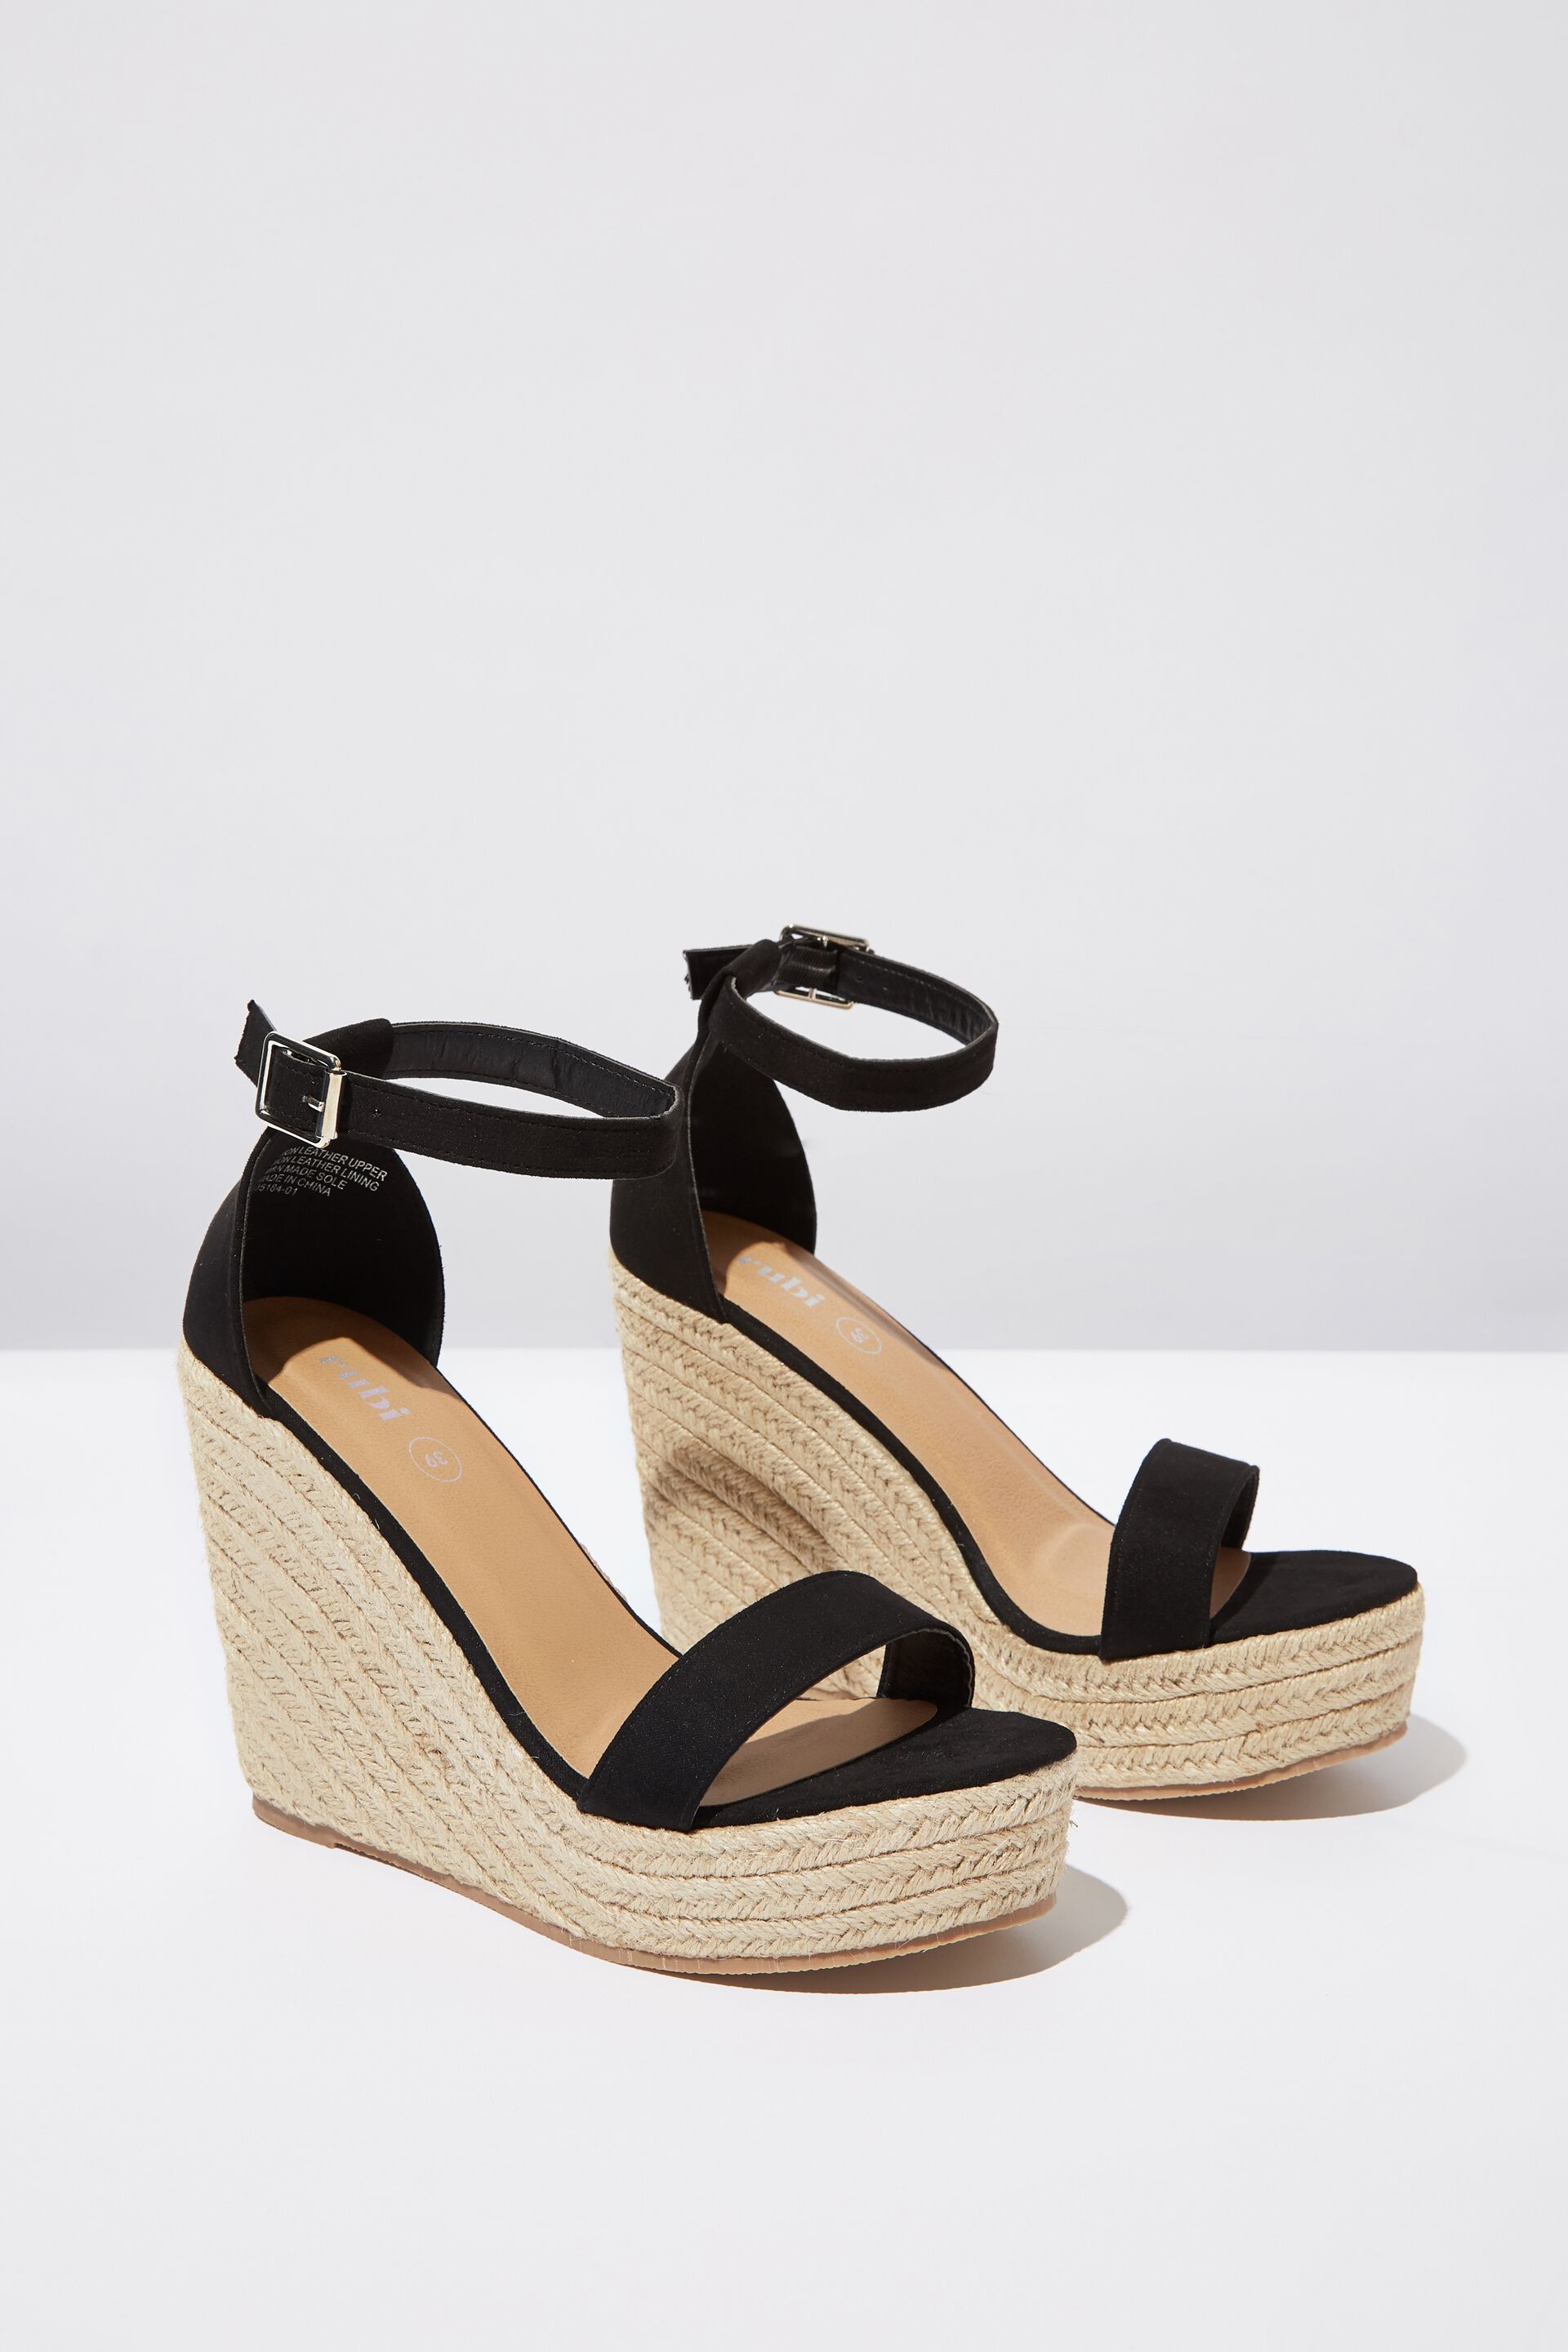 cotton on wedges